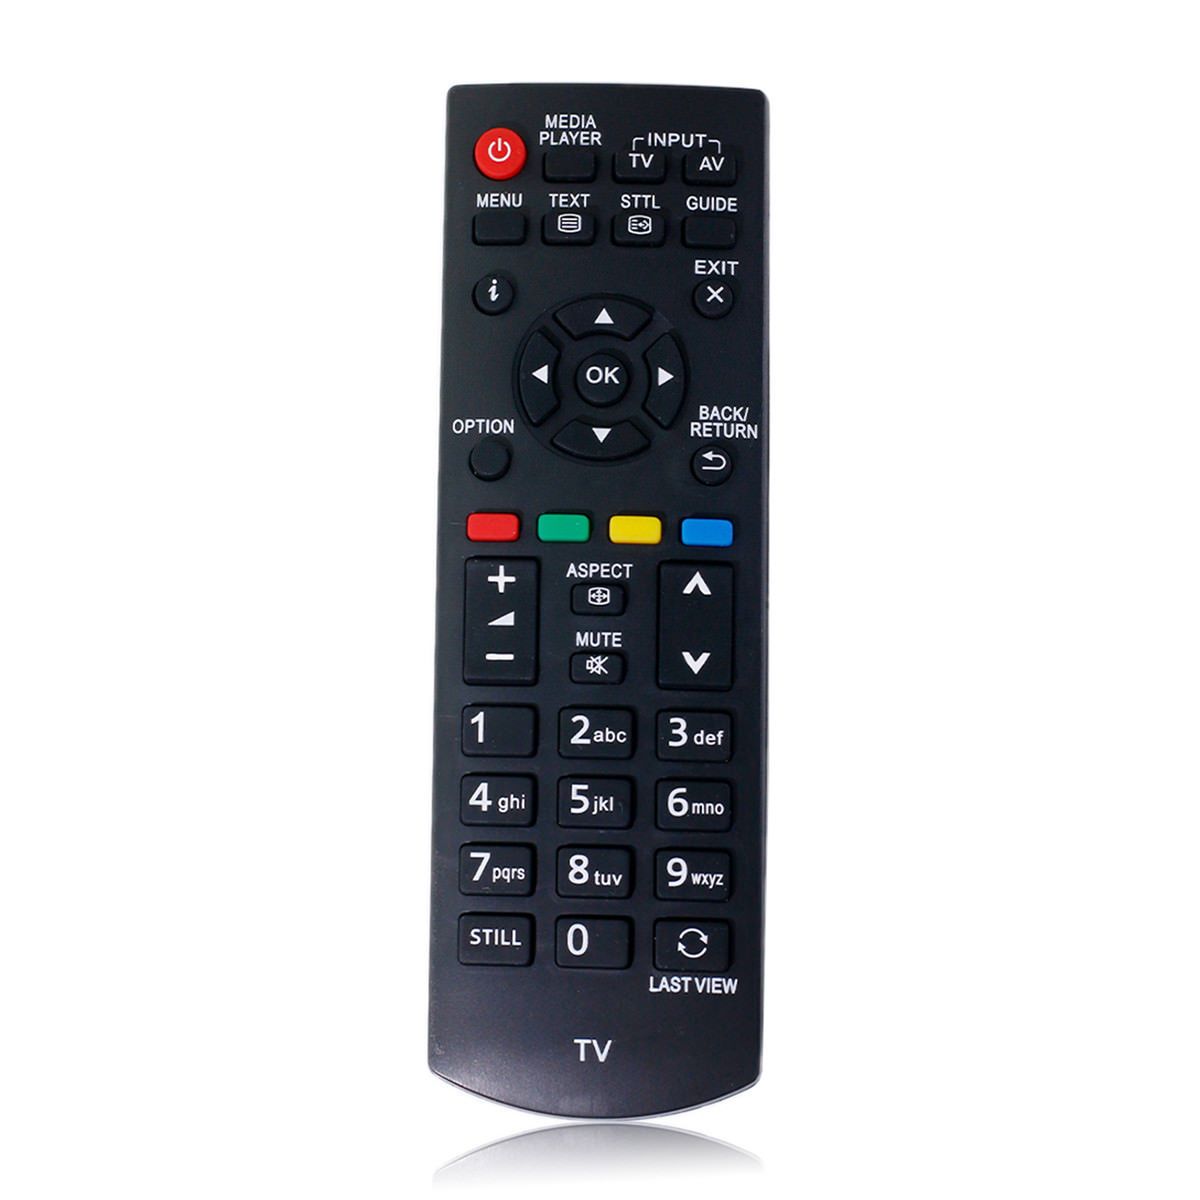 N2QAYB000816 Replacement Remote Control for Panasonic TV TX-50AW404 TX50AW404